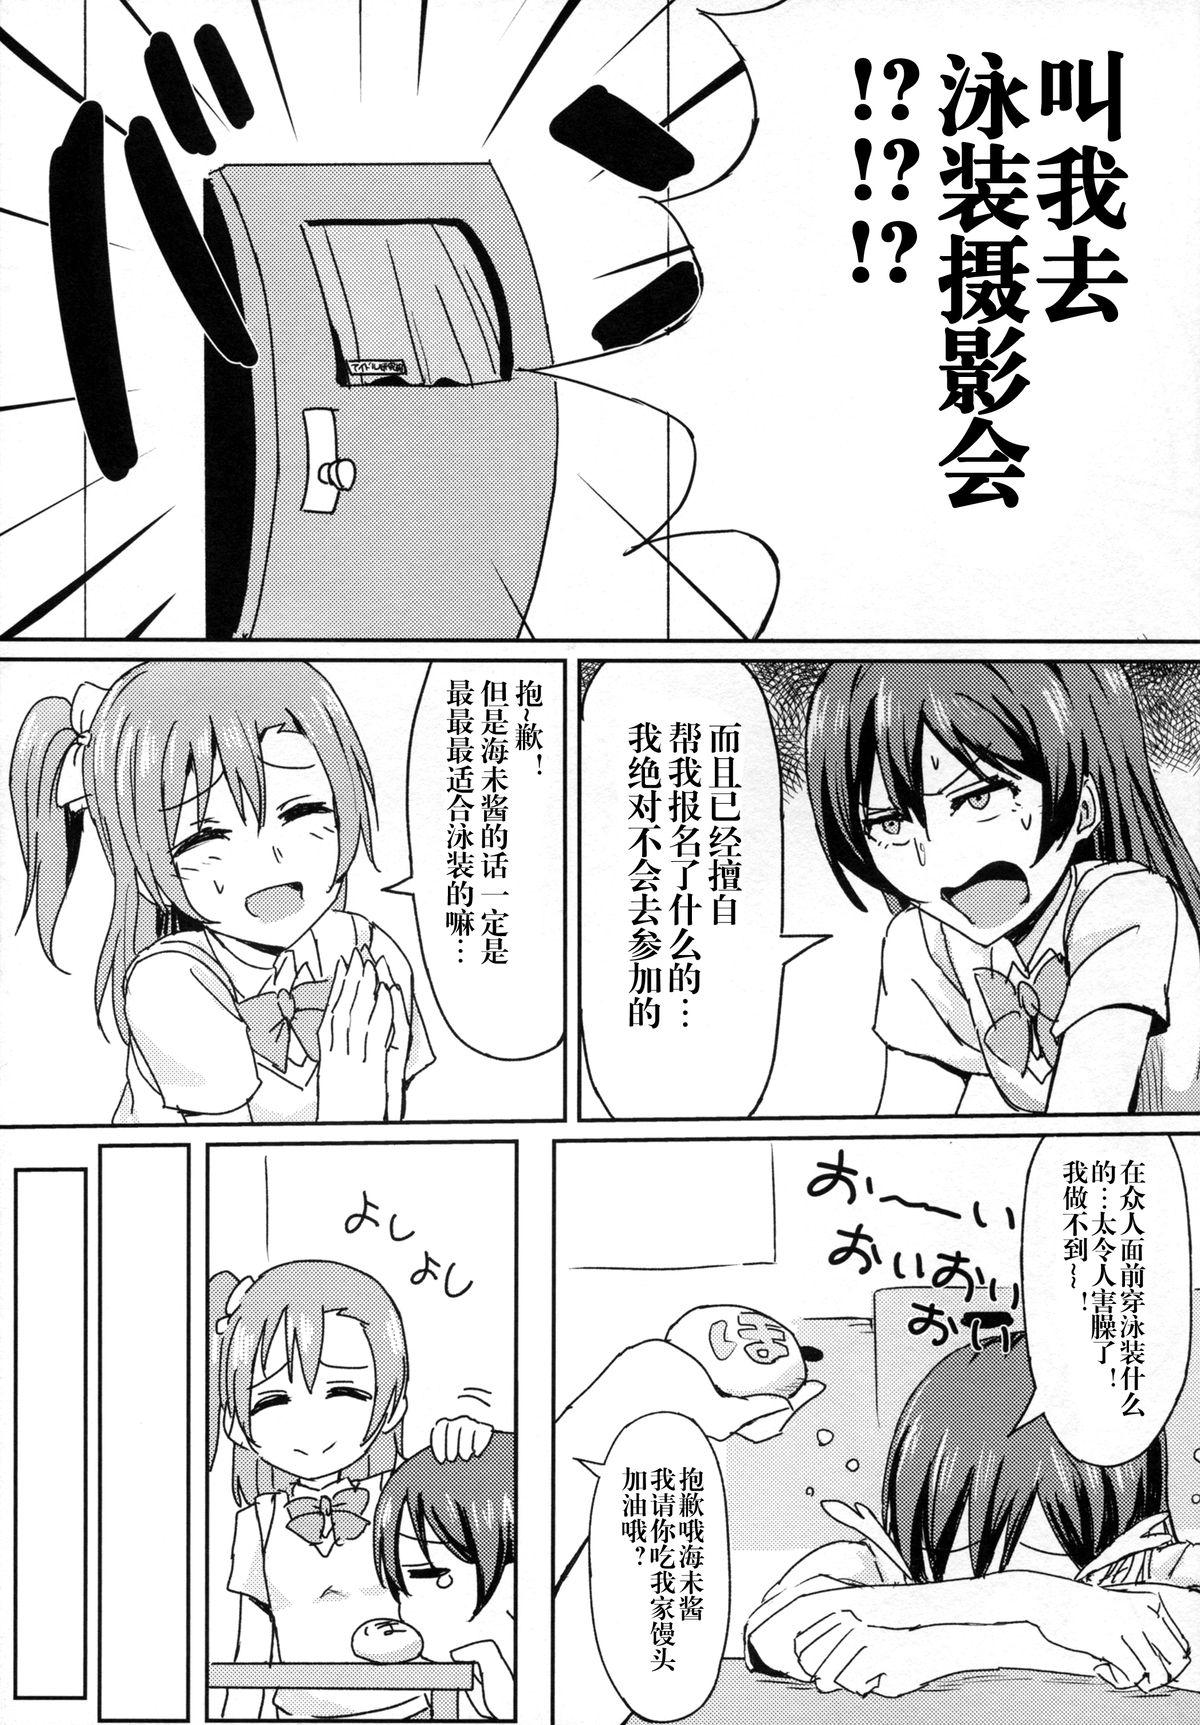 Role Play Hah,Wrench This! - Love live Joven - Page 6